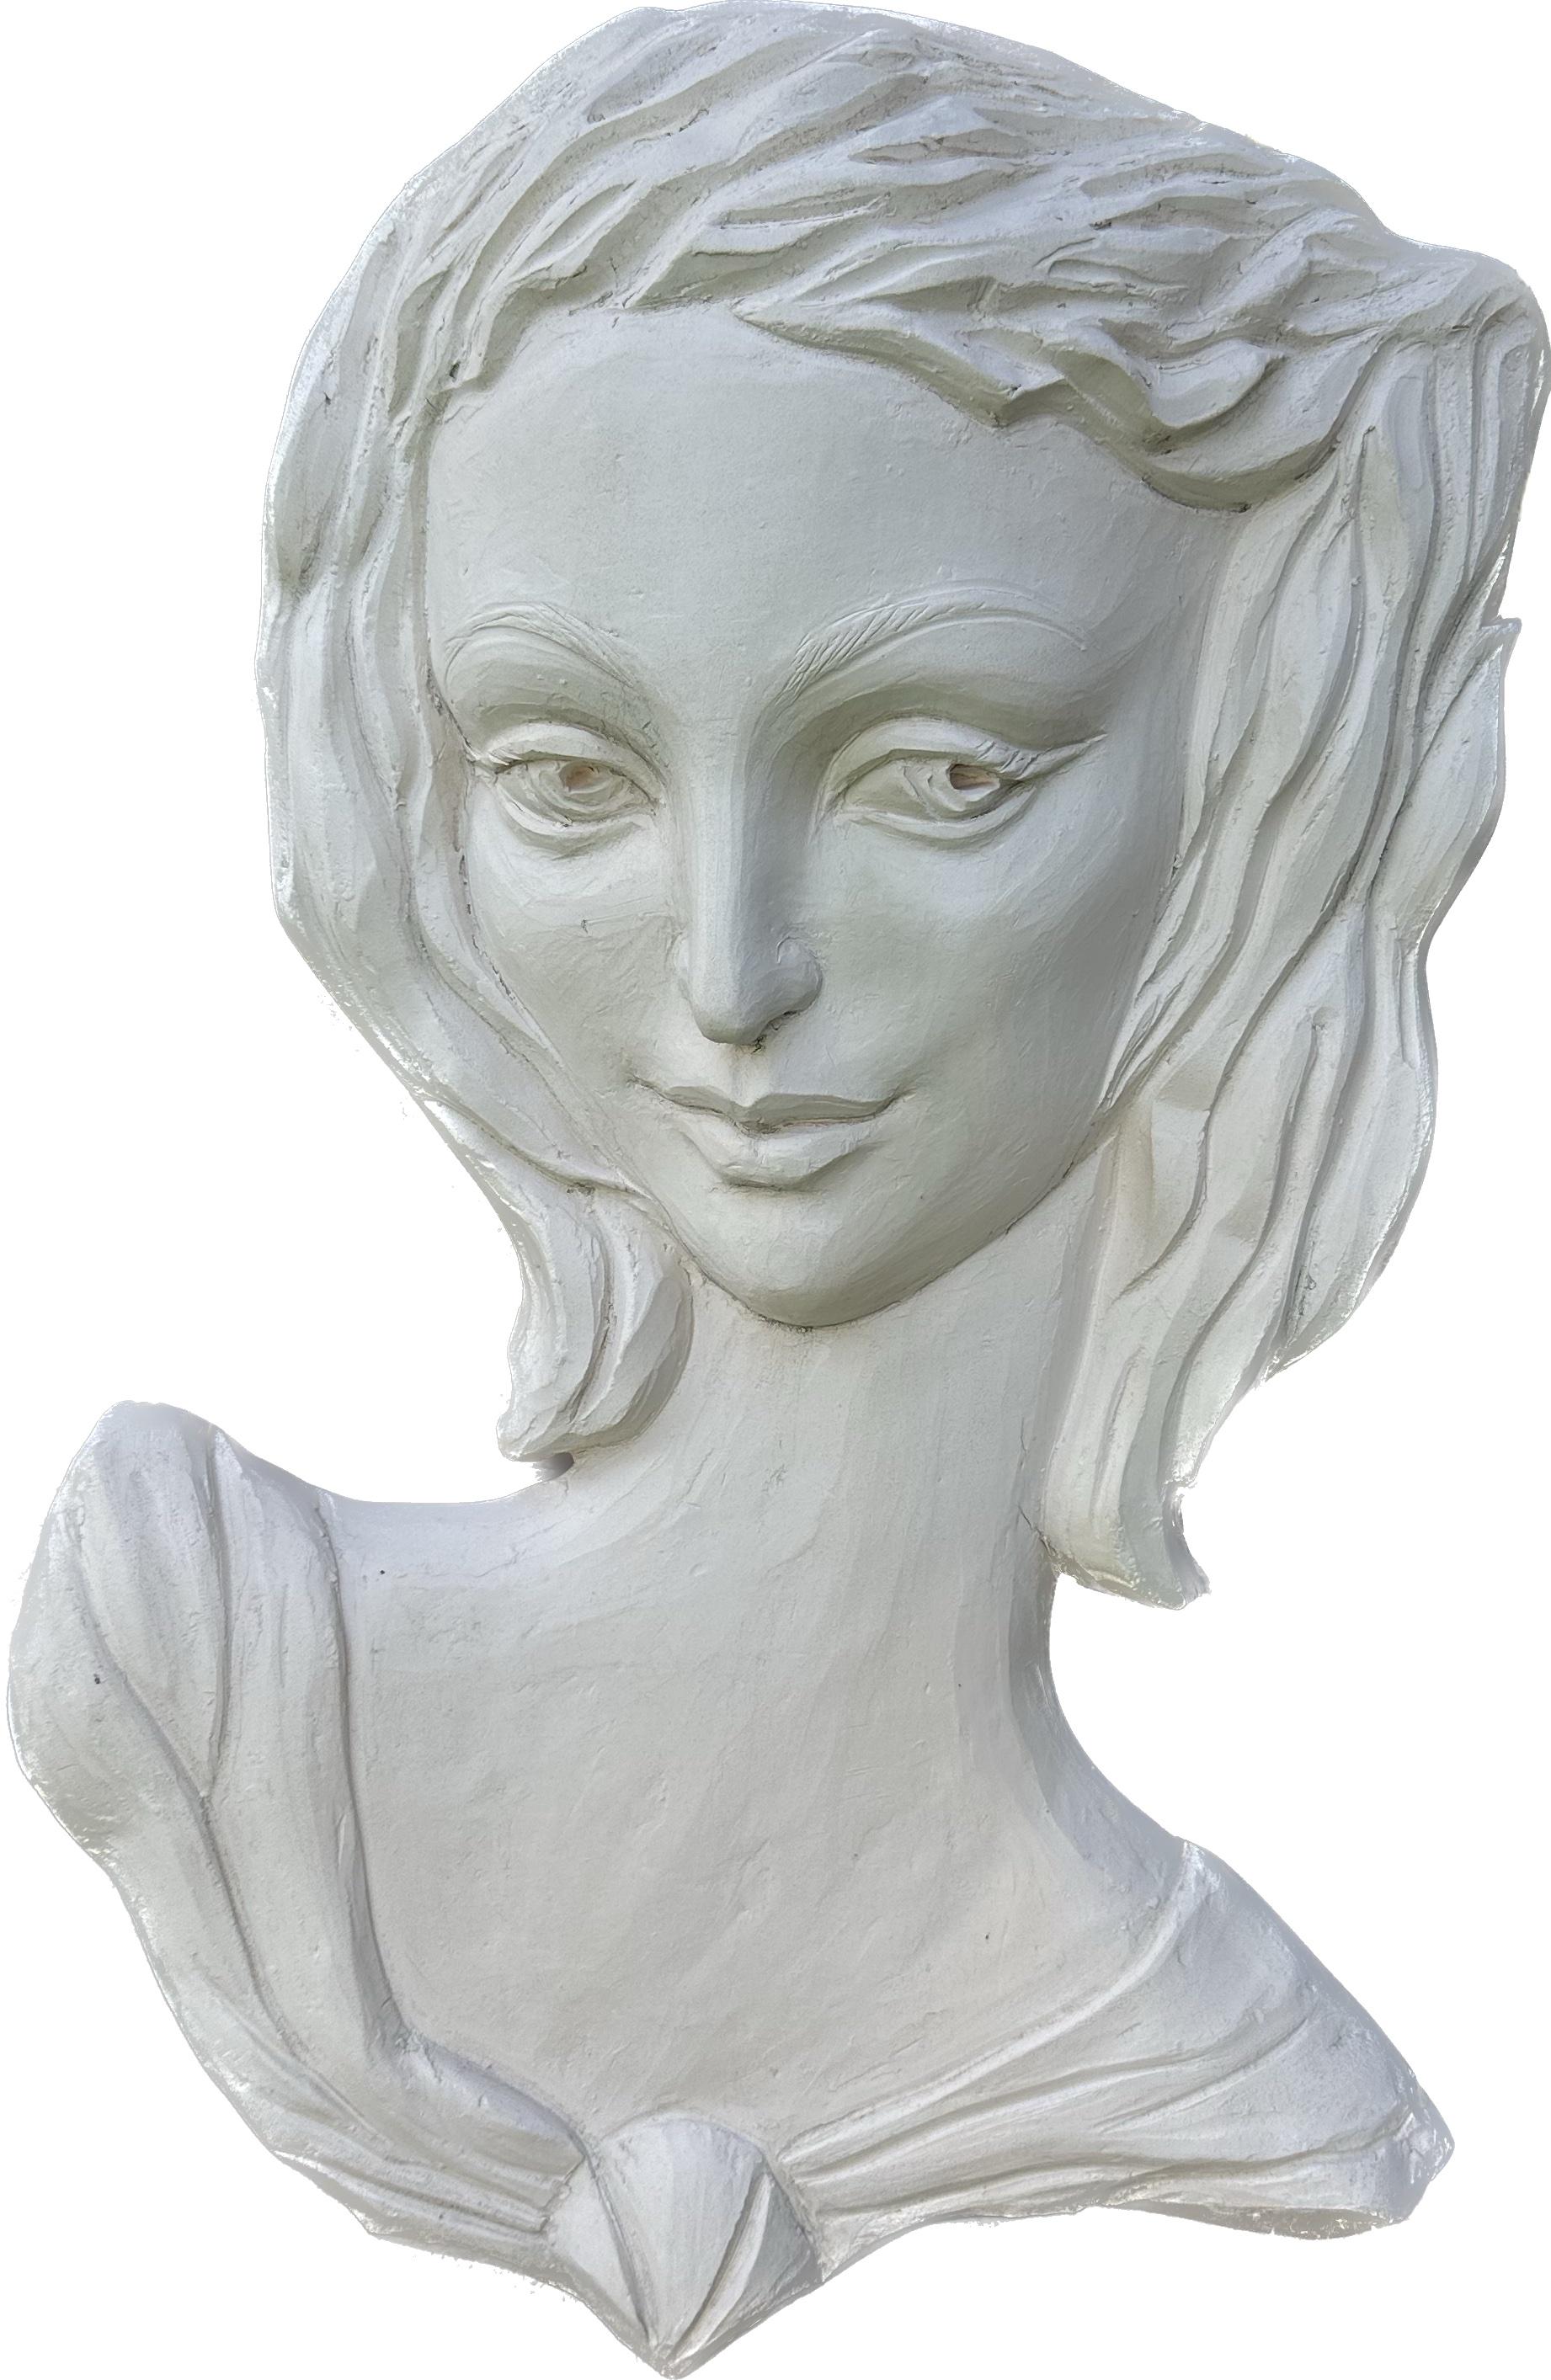 Portrait of Woman, Sculpture, Ceramic Handmade by Garo, One of a Kind